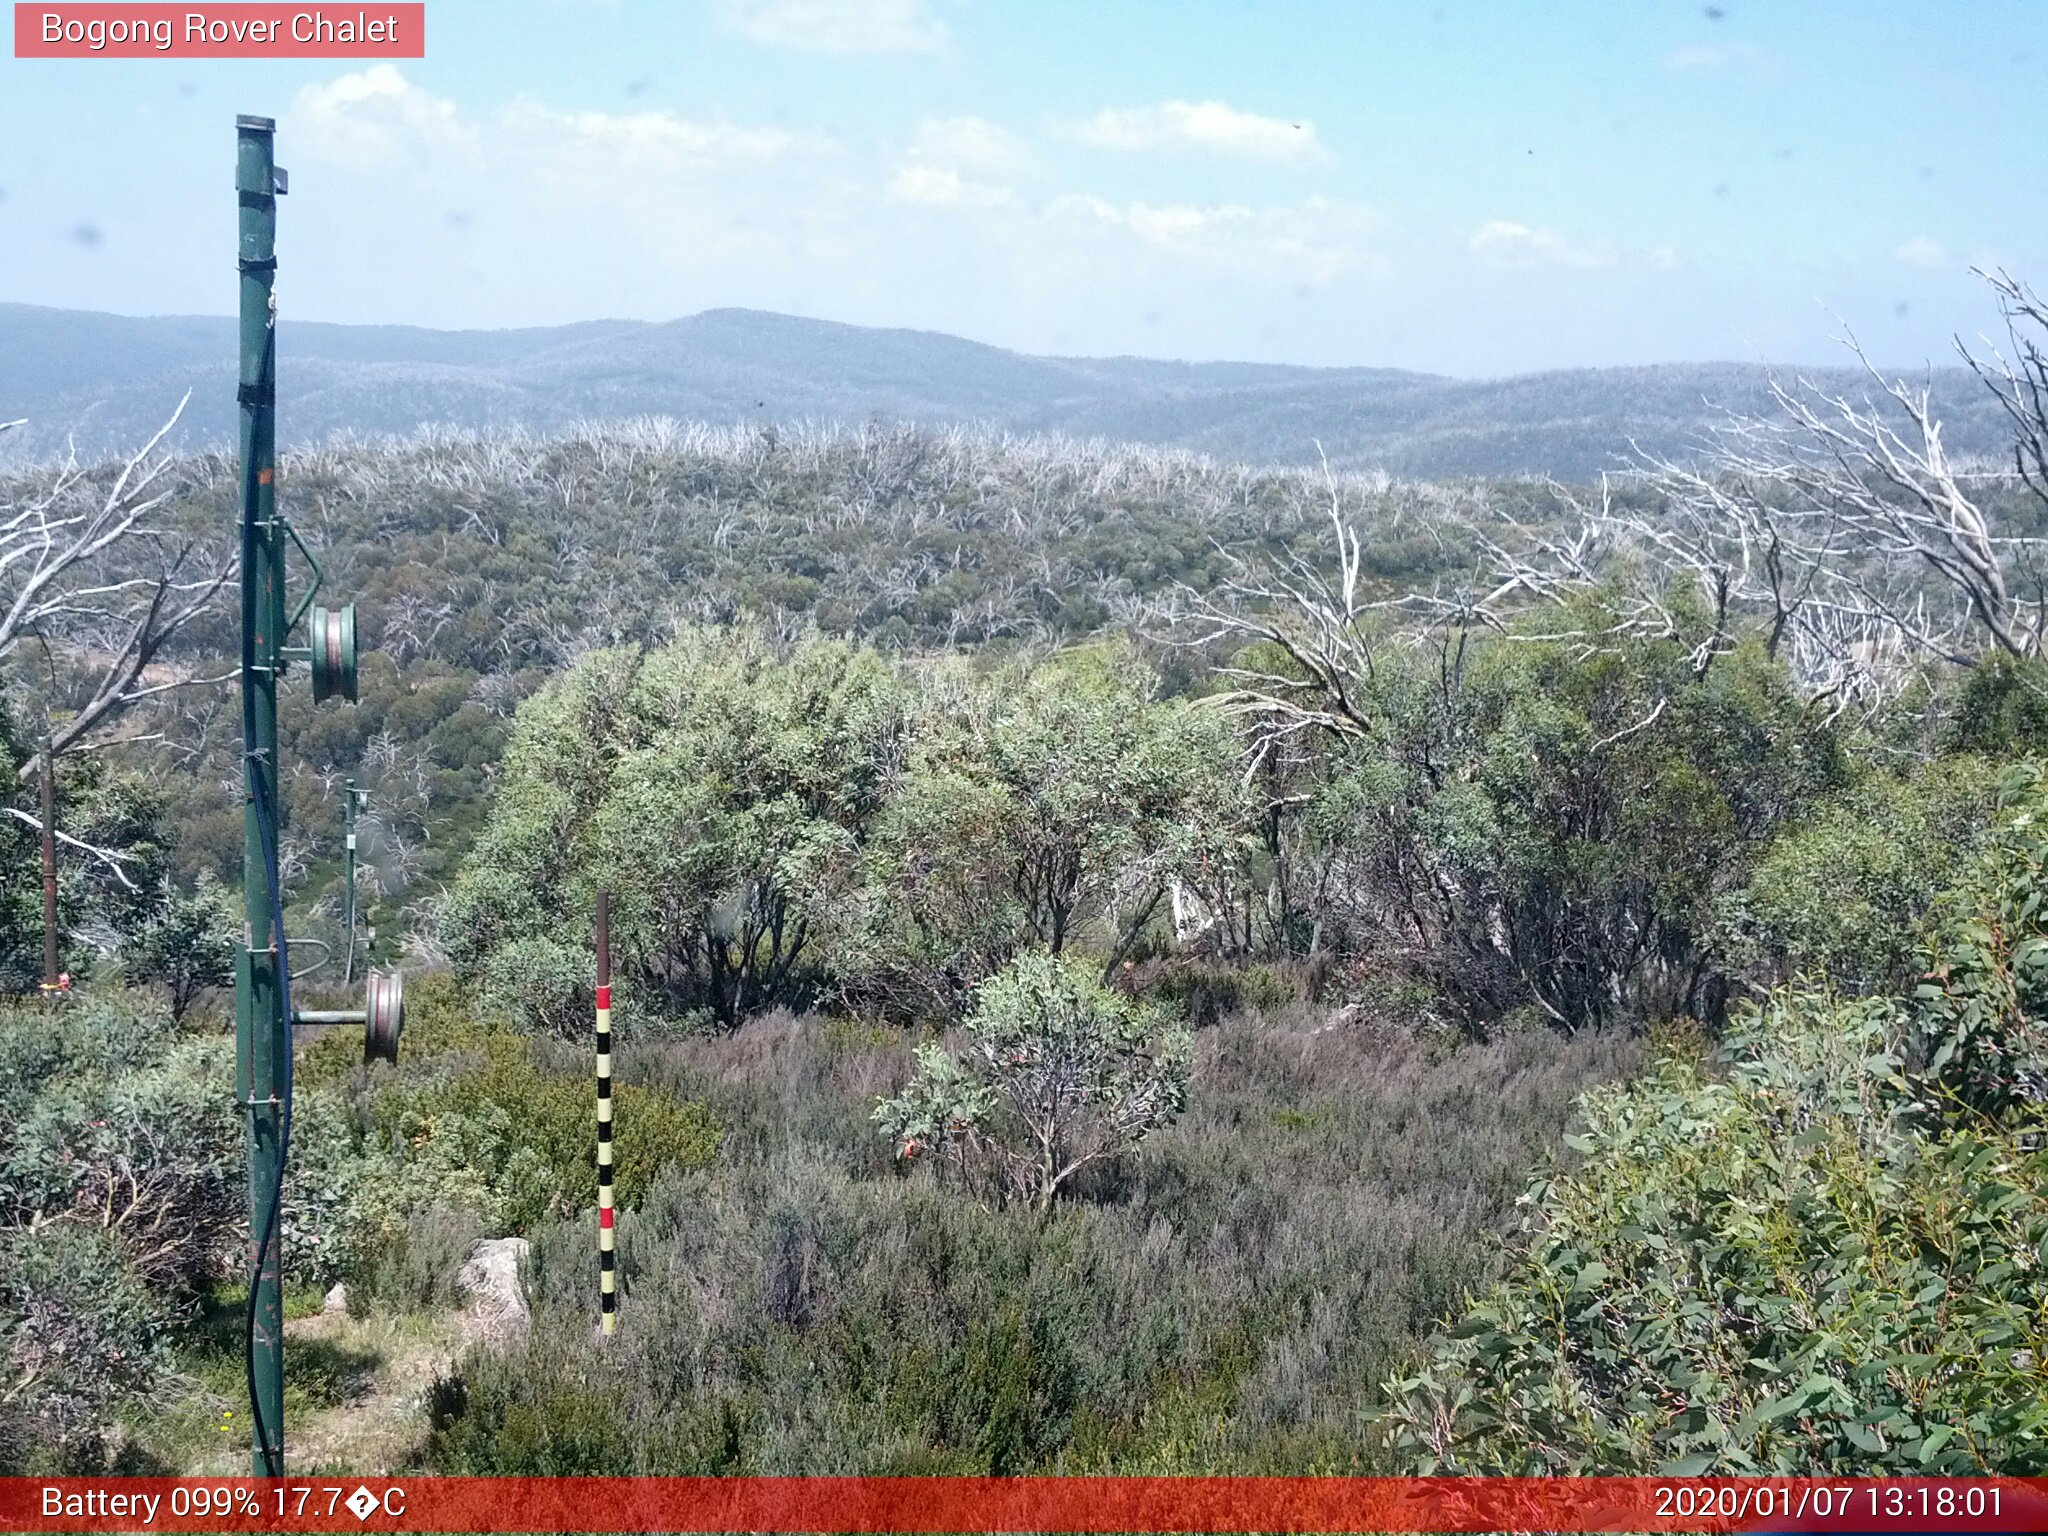 Bogong Web Cam 1:18pm Tuesday 7th of January 2020